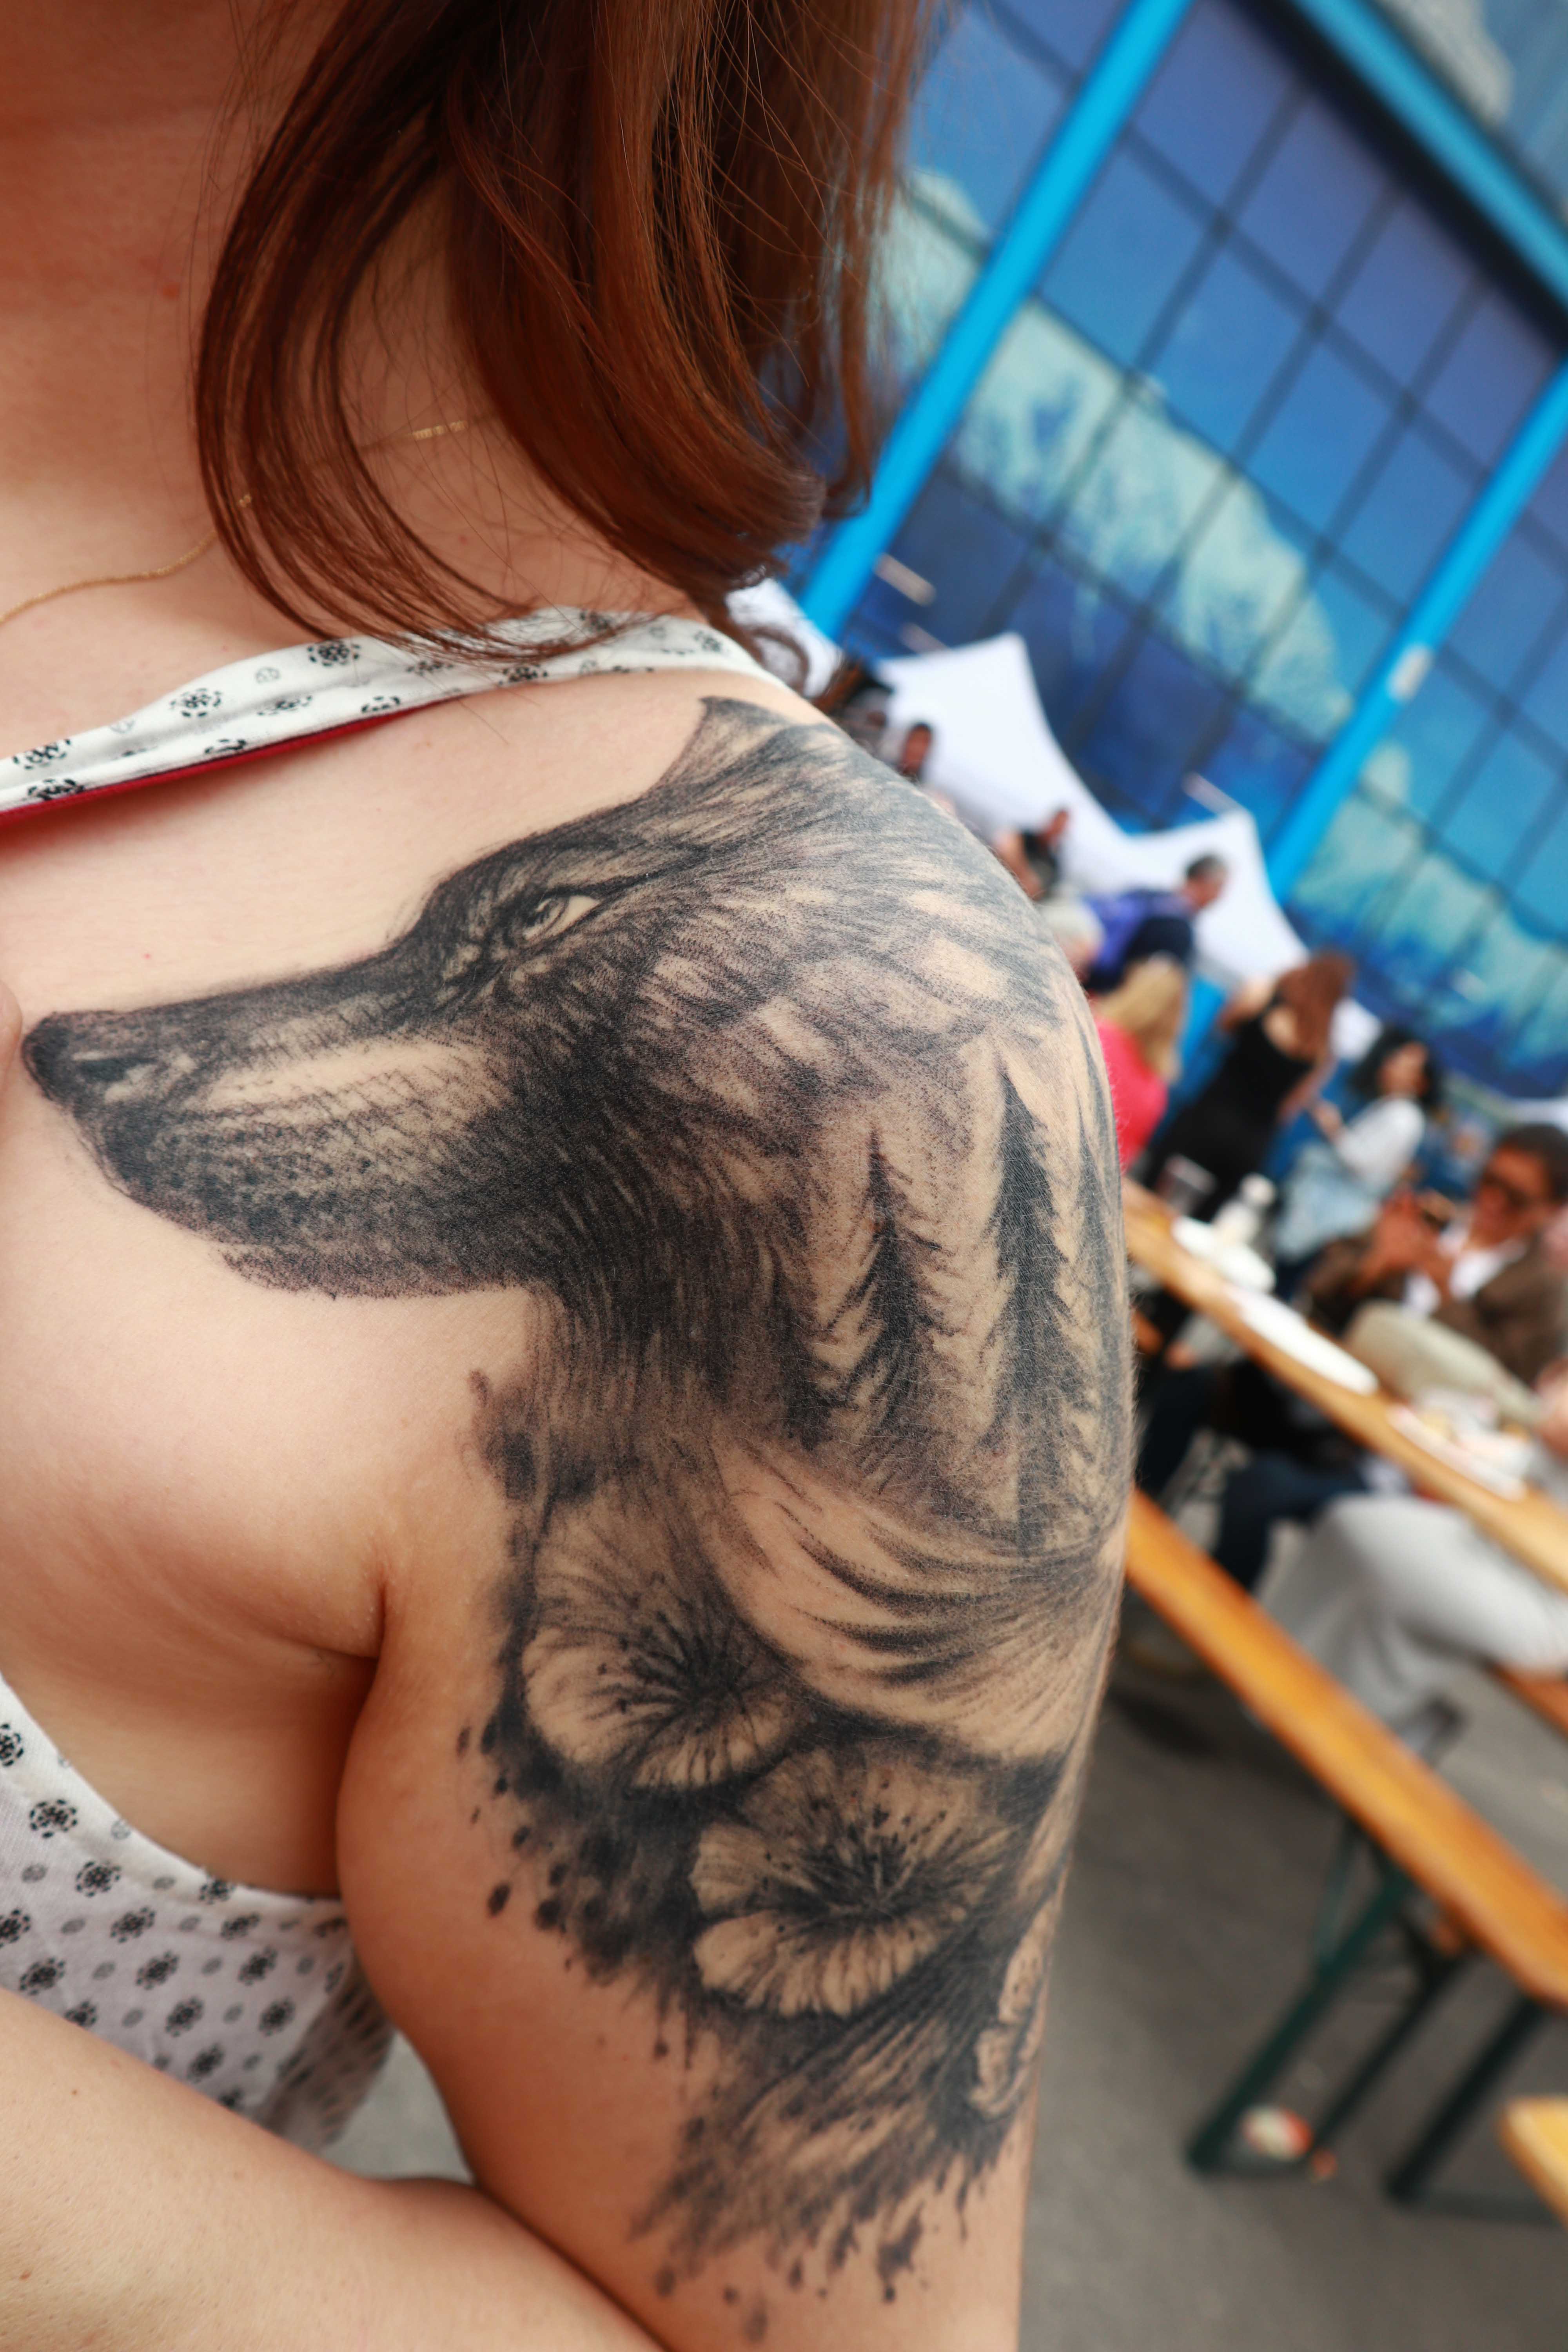 Wolf Tattoo, Photography, How to, Awesome Tattoos, Great Tattoo, Artist, How to promote yourself, How take care of yourself, How to relax, Relaxing, Photography